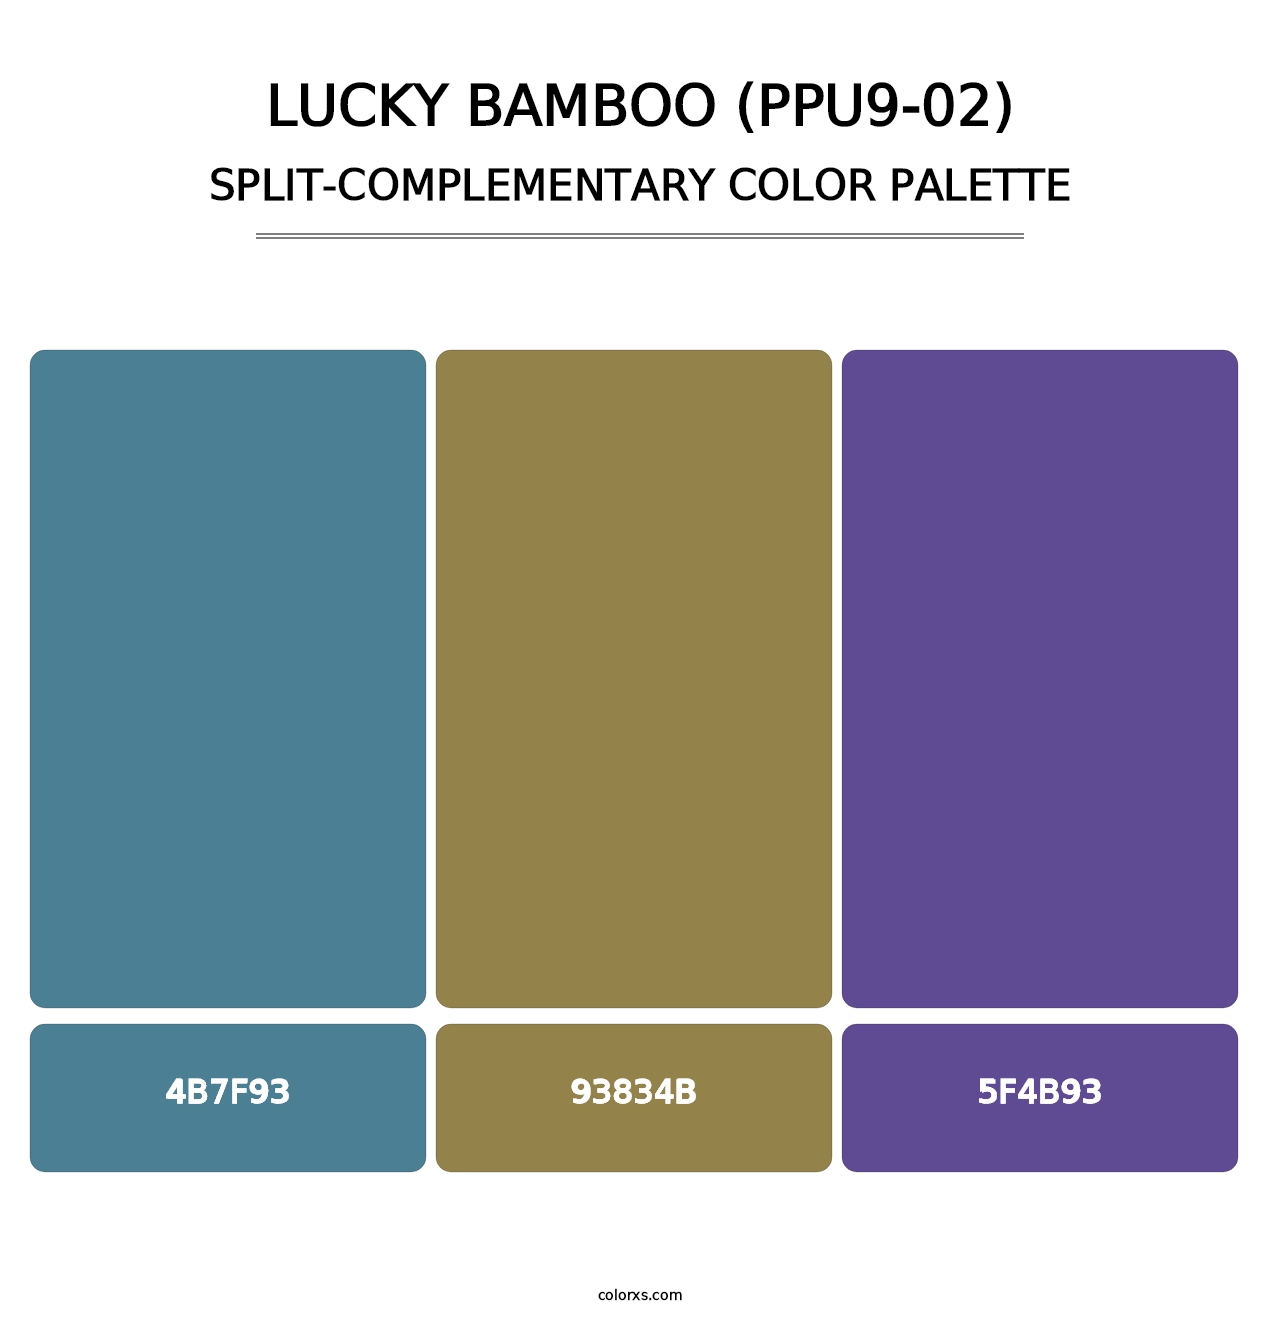 Lucky Bamboo (PPU9-02) - Split-Complementary Color Palette